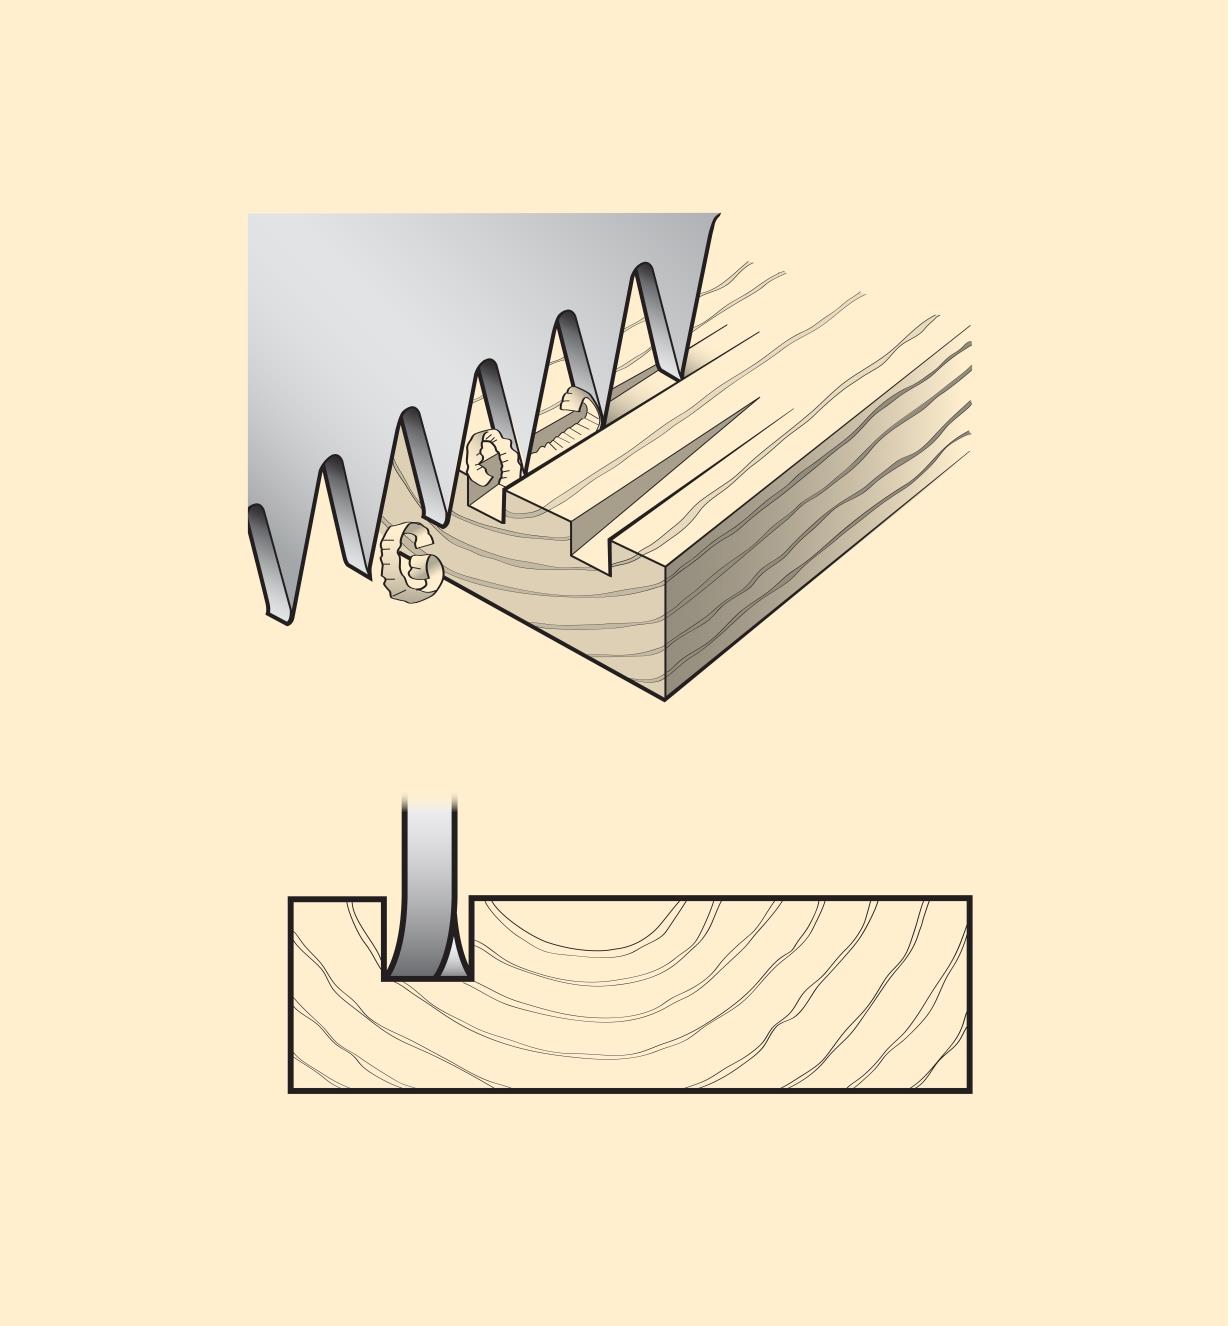 Illustration of cut created by the saw teeth